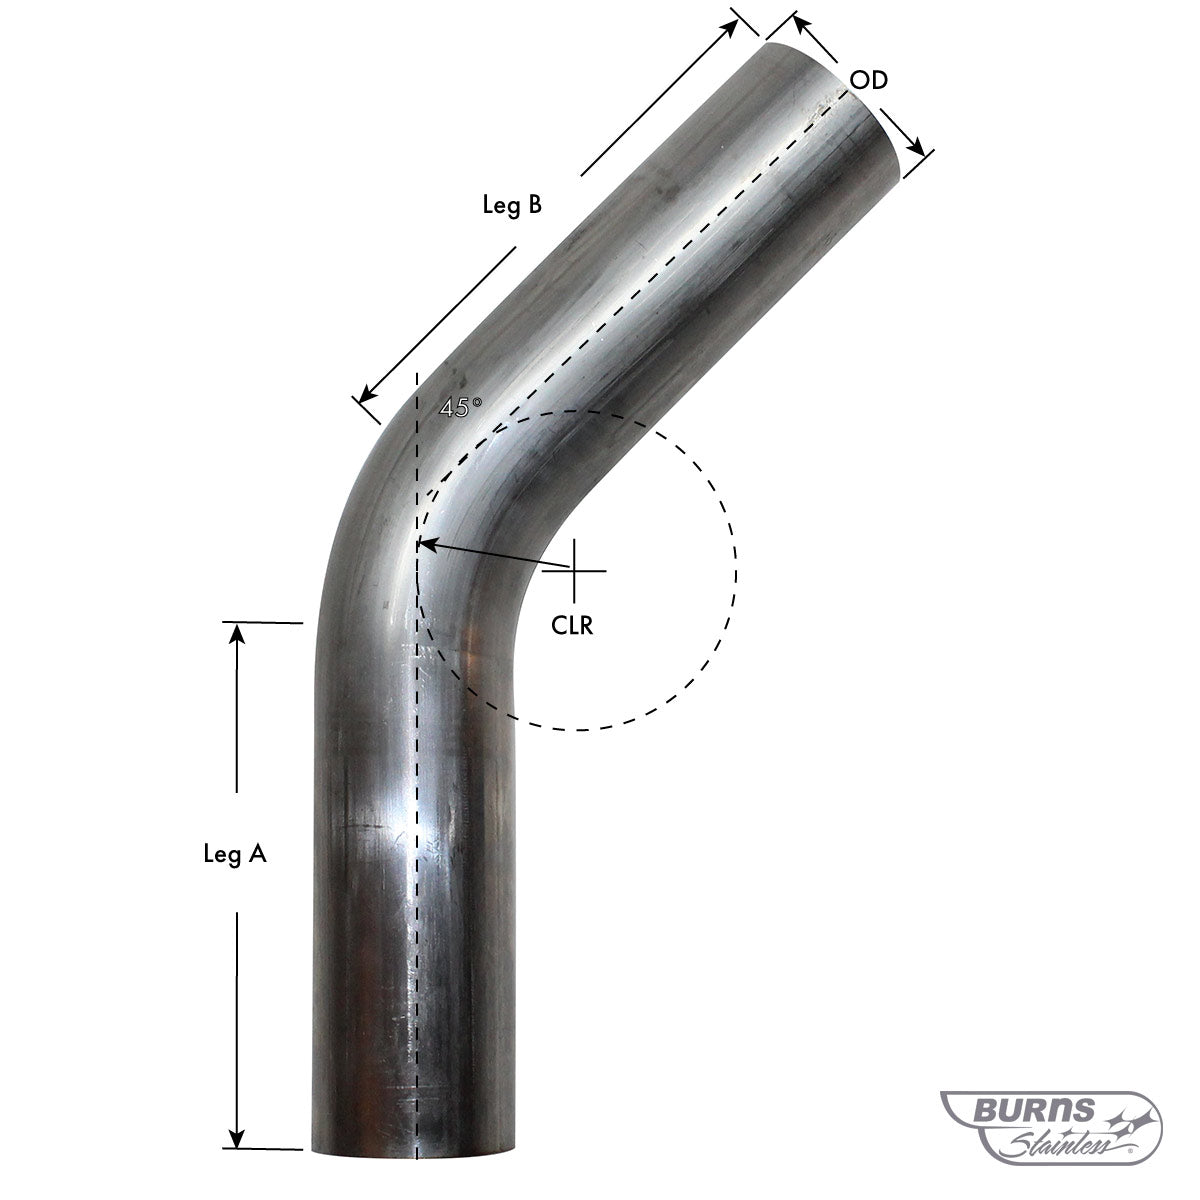 Stainless Steel Straight Exhaust Pipe (3.5 inch OD 5' feet long)